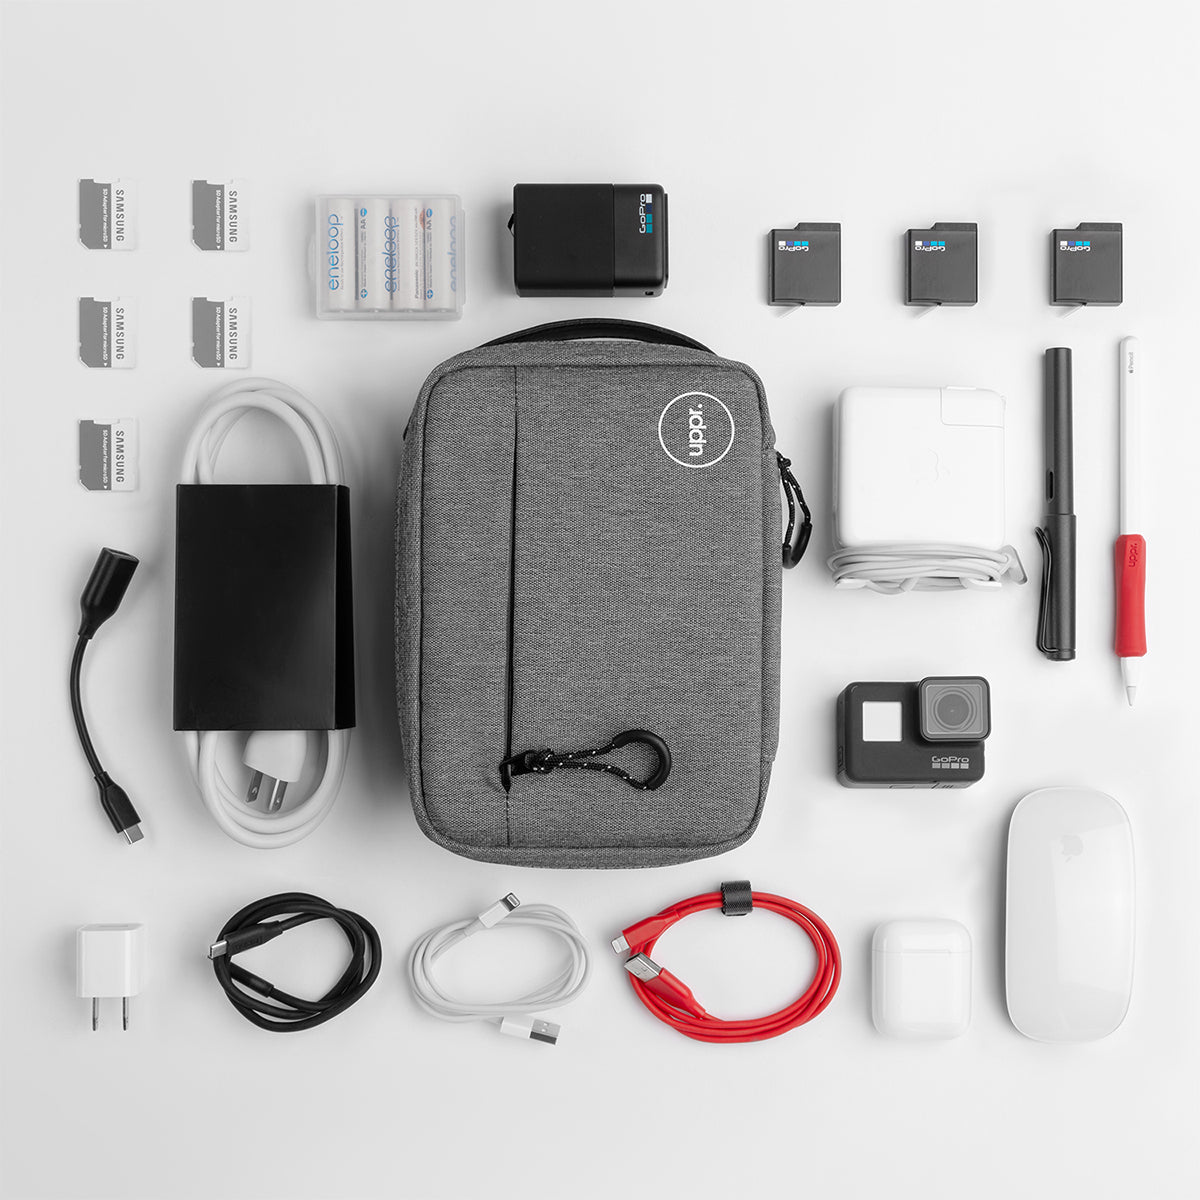 Organizer 9.0 Large Pouch for Cables, Chargers and Small Accessories